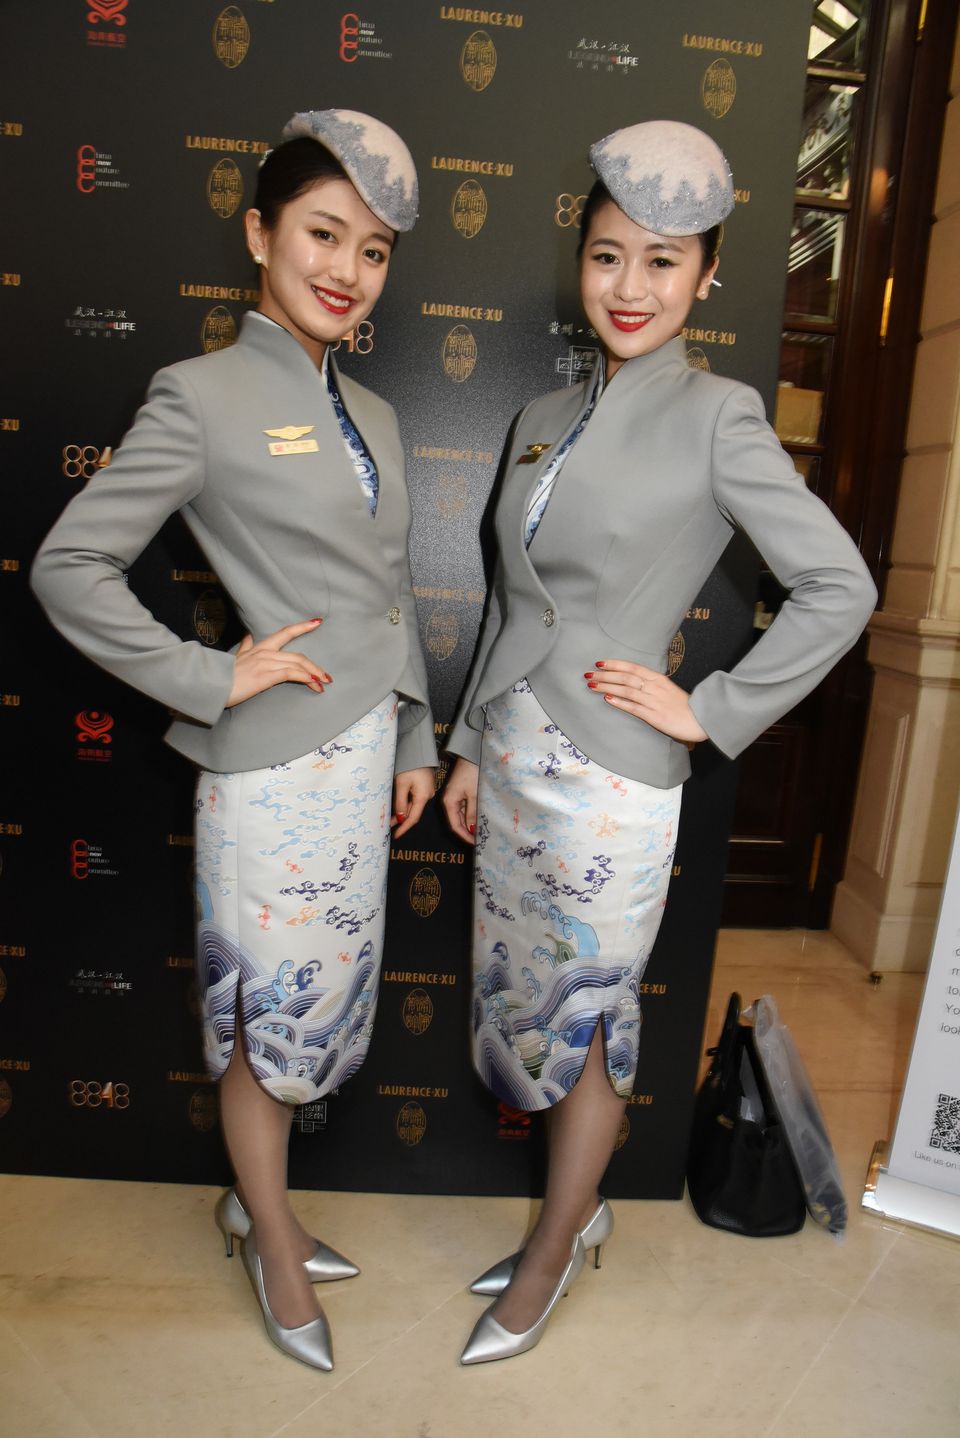 Airline Flight Attendant Uniforms | Images and Photos finder